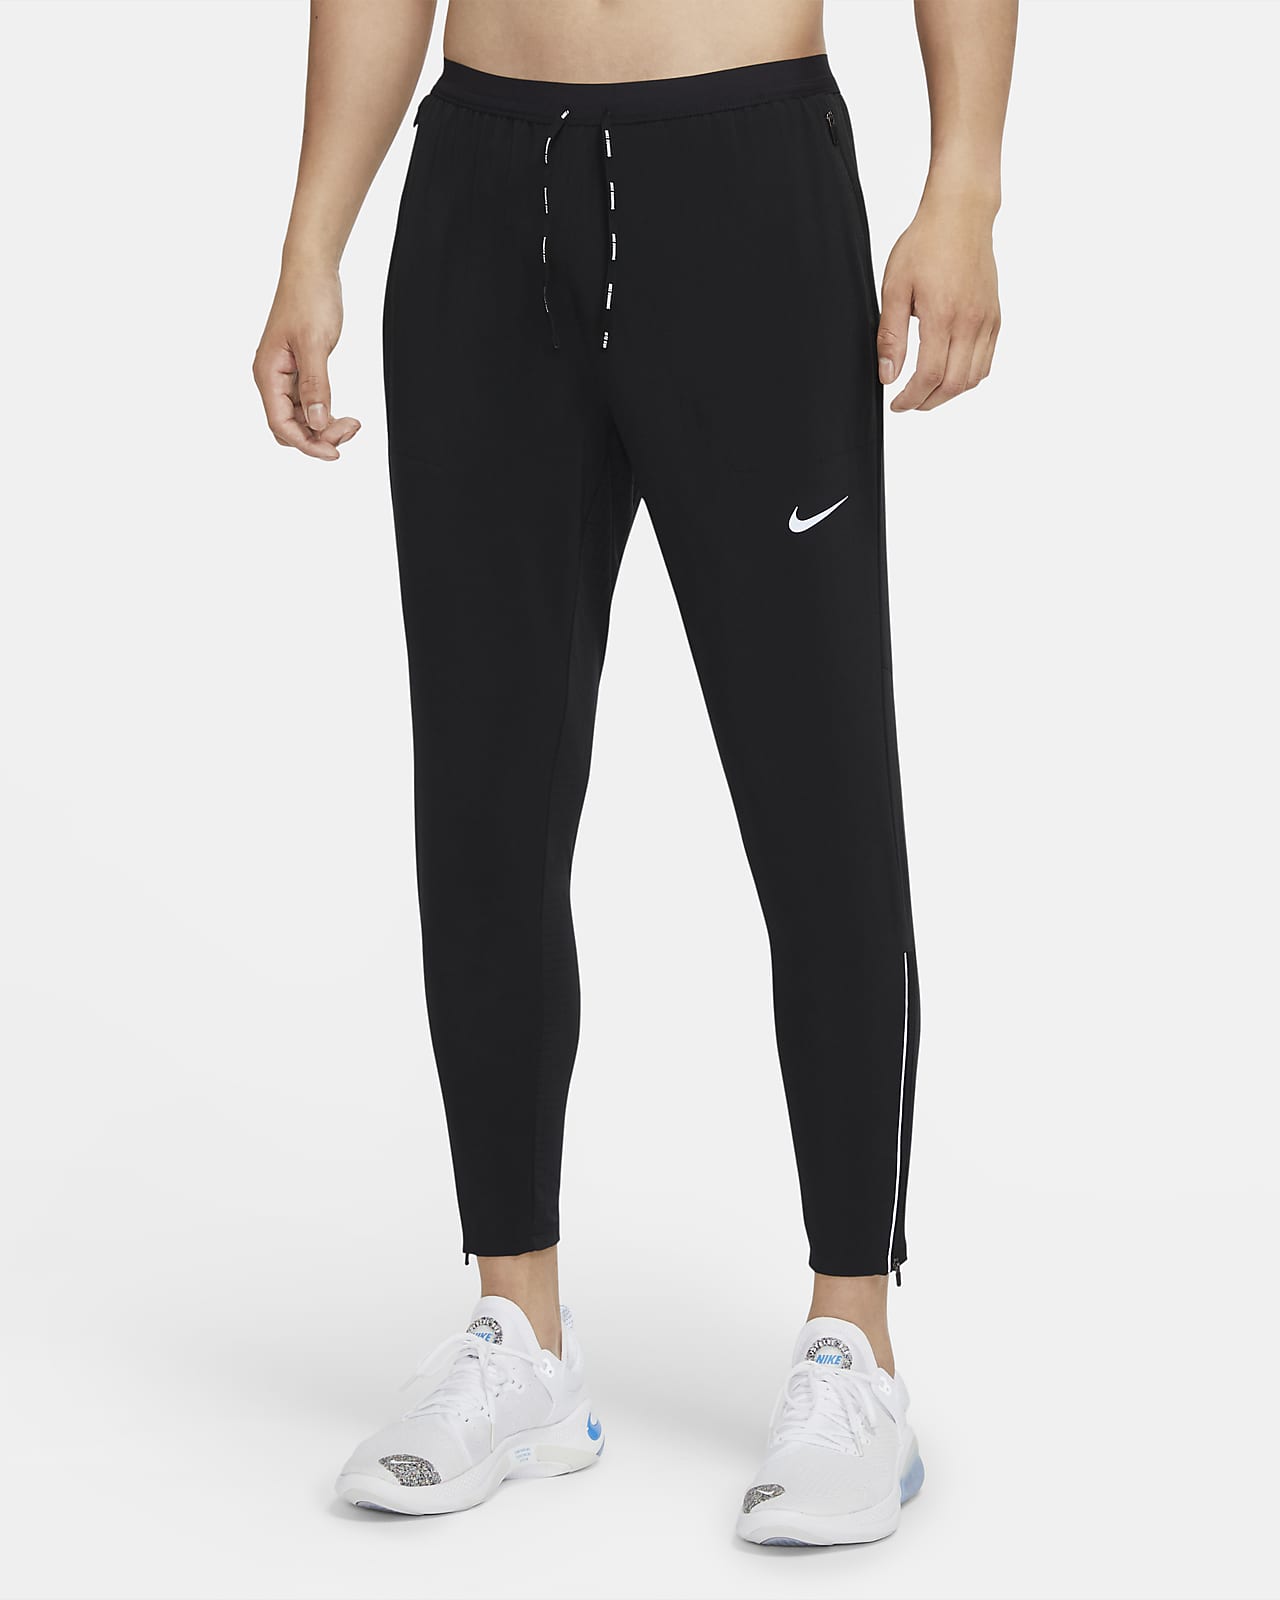 men's knit running trousers nike essential